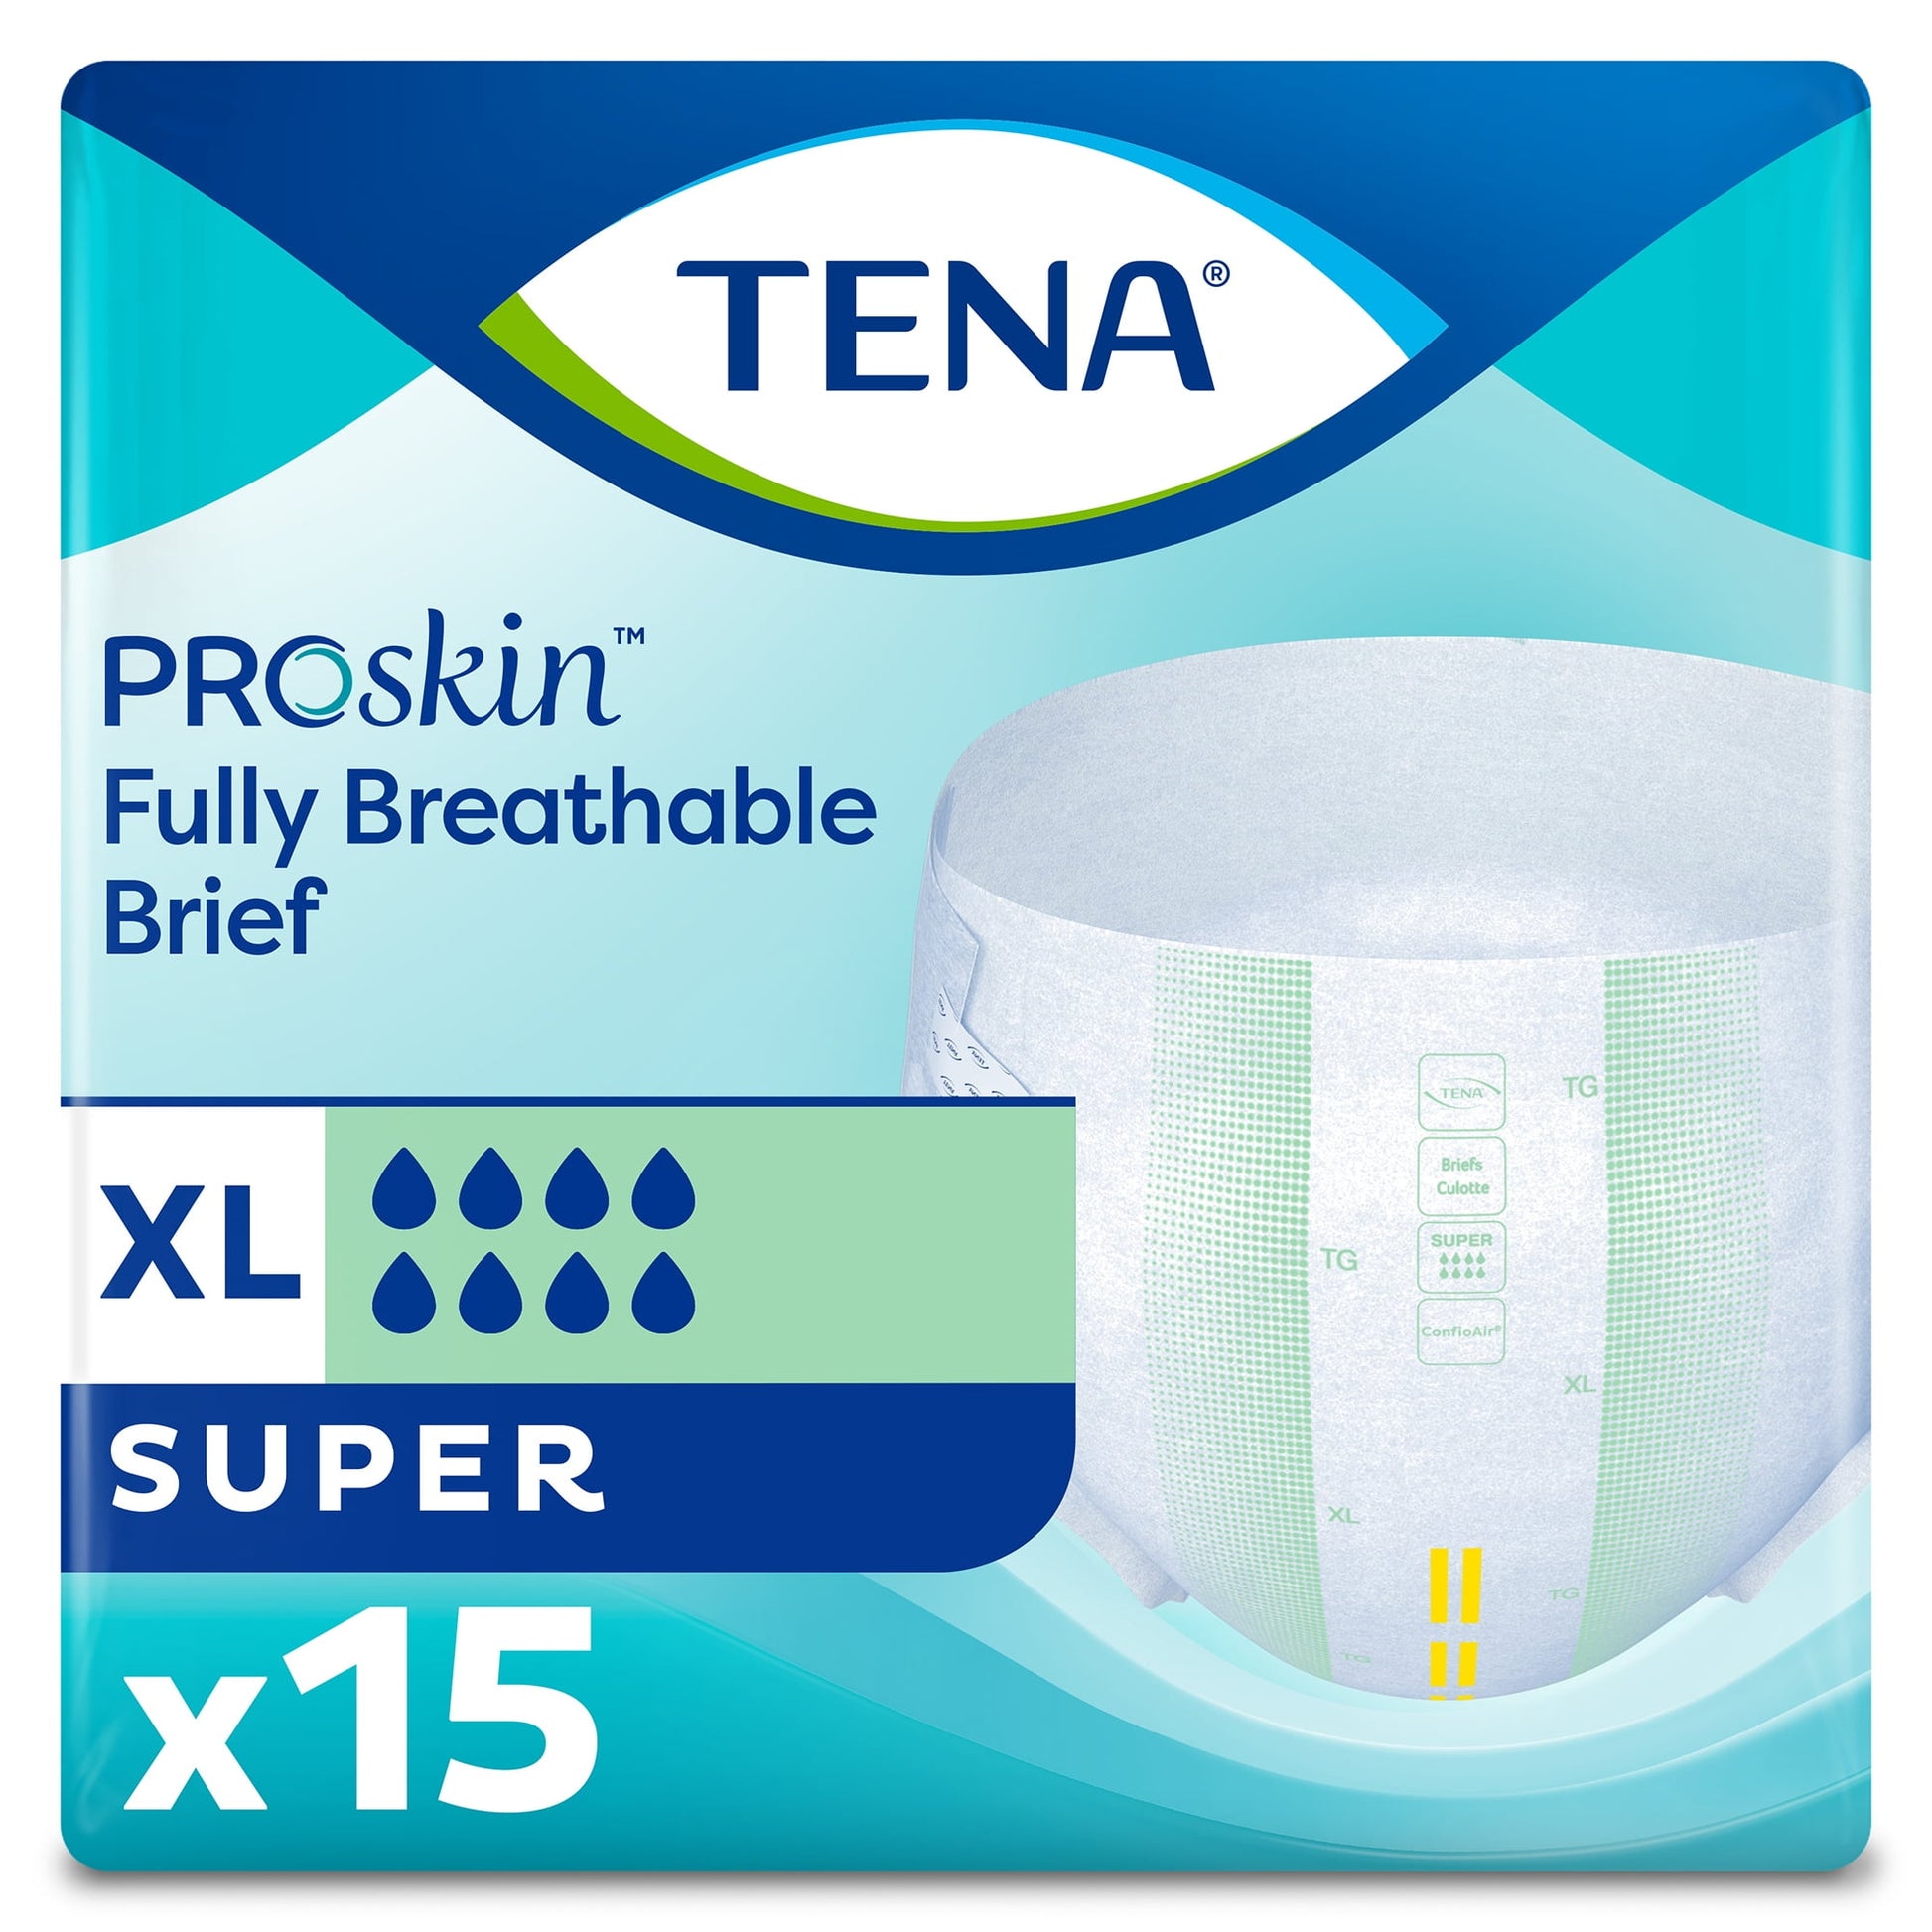 TENA ProSkin Super Adult Incontinence Brief XL Heavy Absorbency Overnight, 68011, 15 Ct- KatyMedSolutions